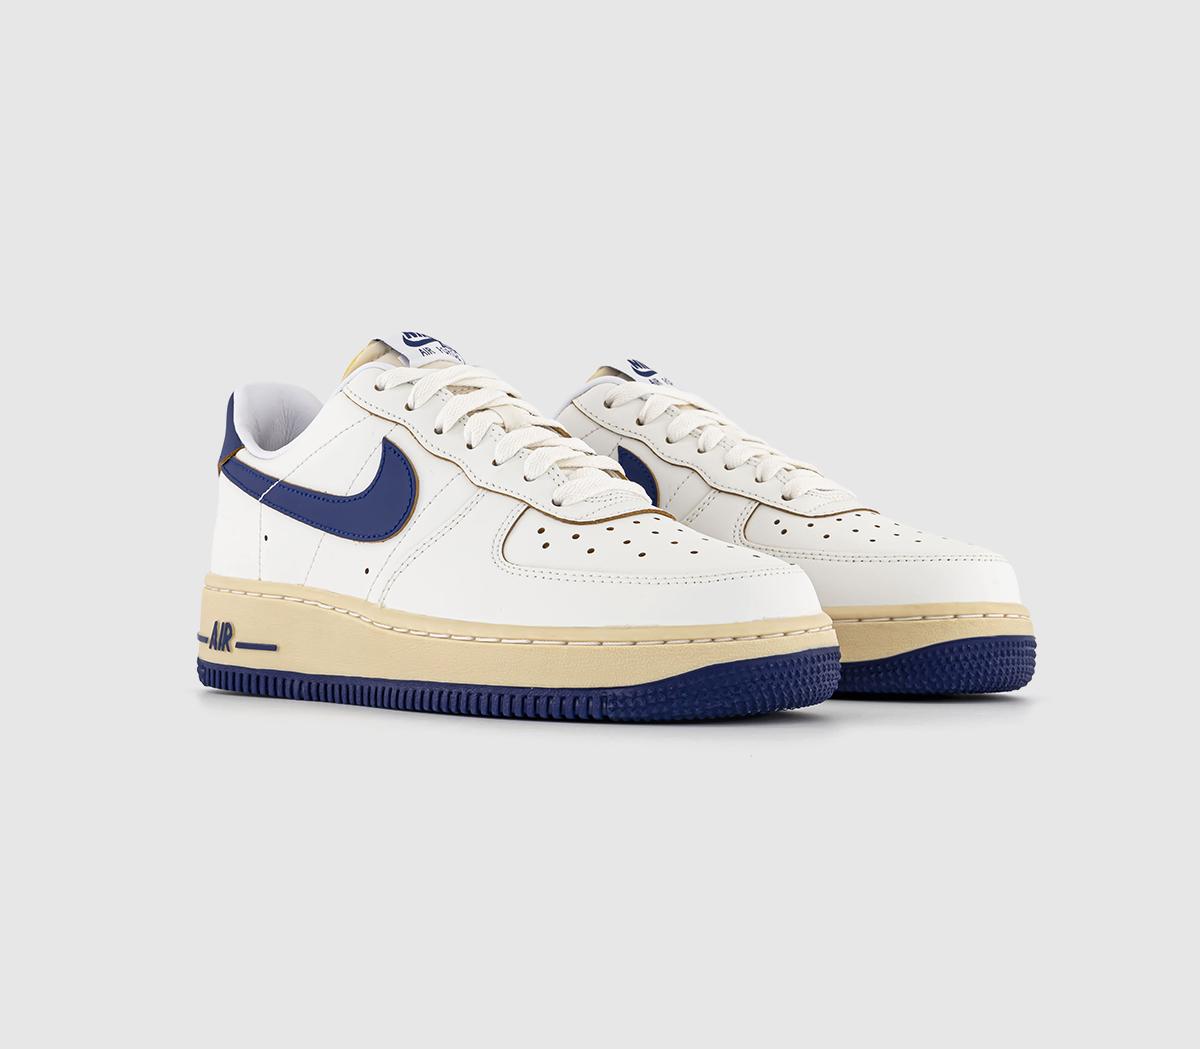 Nike Womens Air Force 1 07 Trainers Sail Deep Royal Blue Pale Vanilla Gold Suede White, 5.5